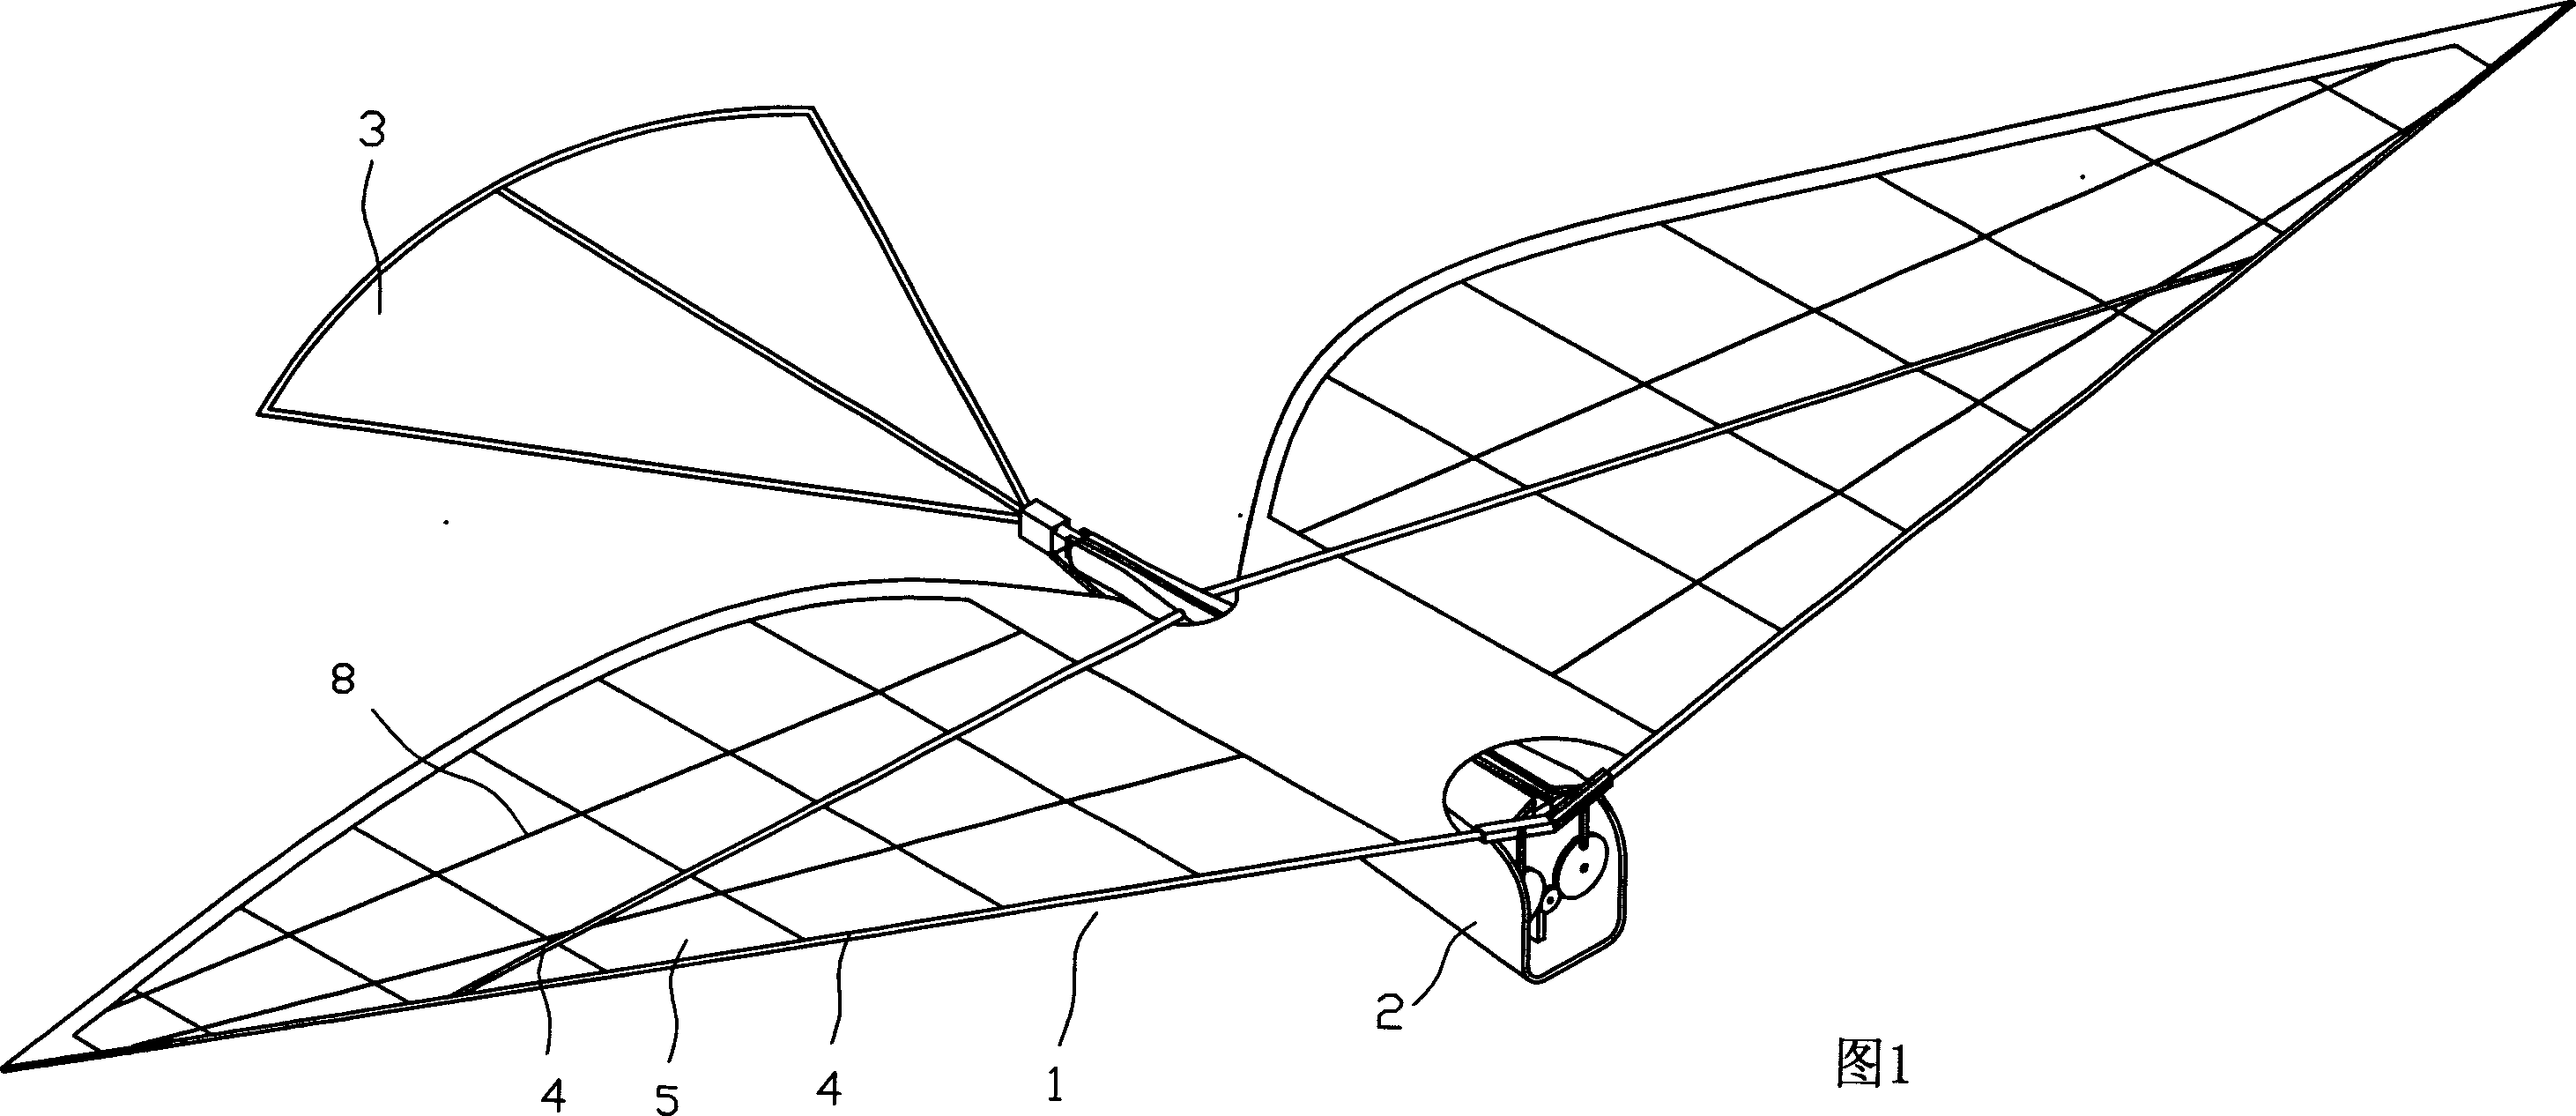 Wing structure for bionic aircraft